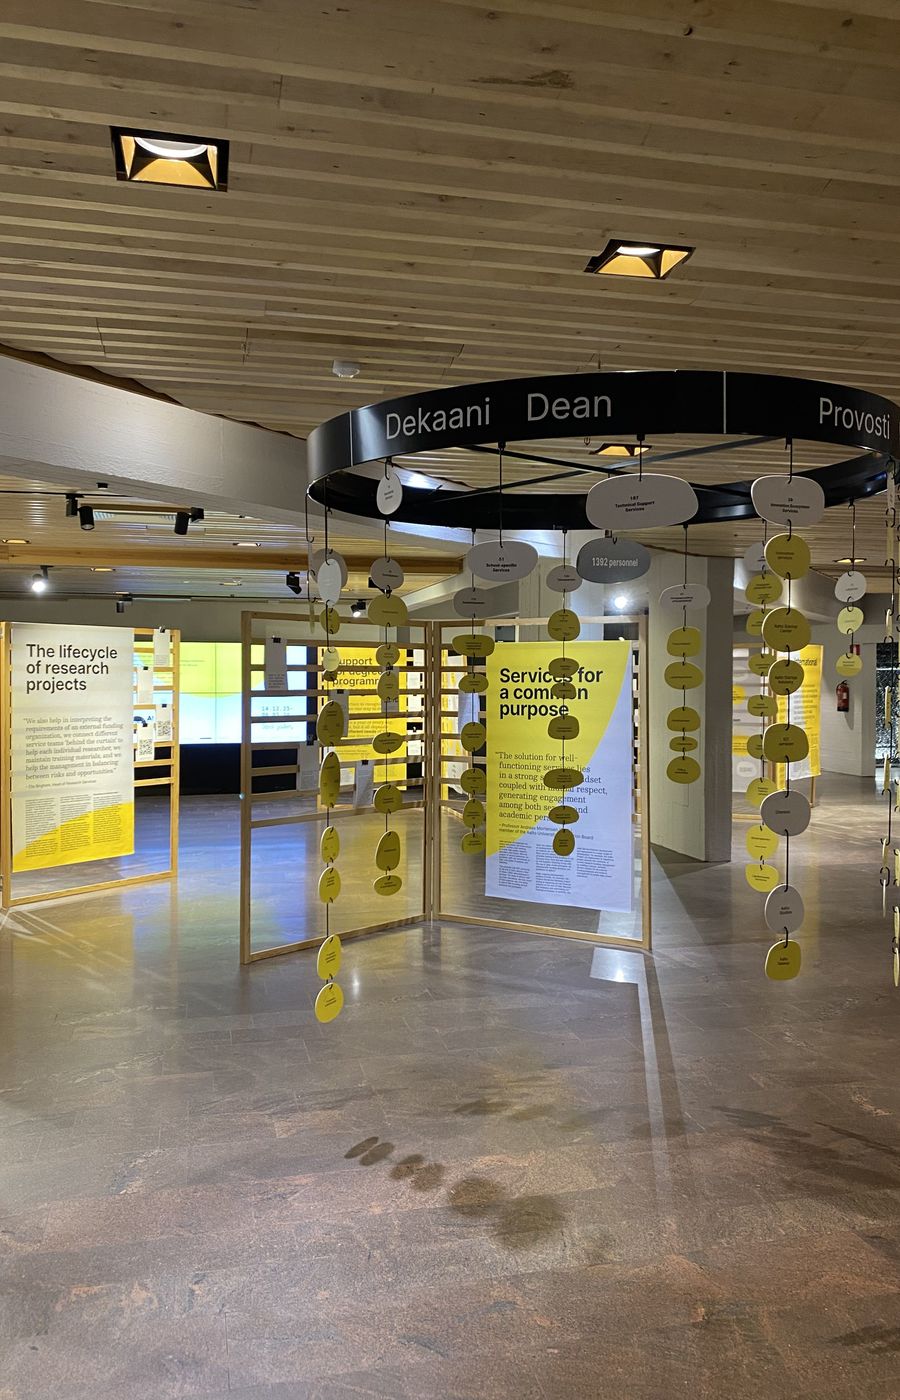 exhibition installation view, large mobile hangs in right foreground, behind wooden stands withprinted yellow and gray fabrics